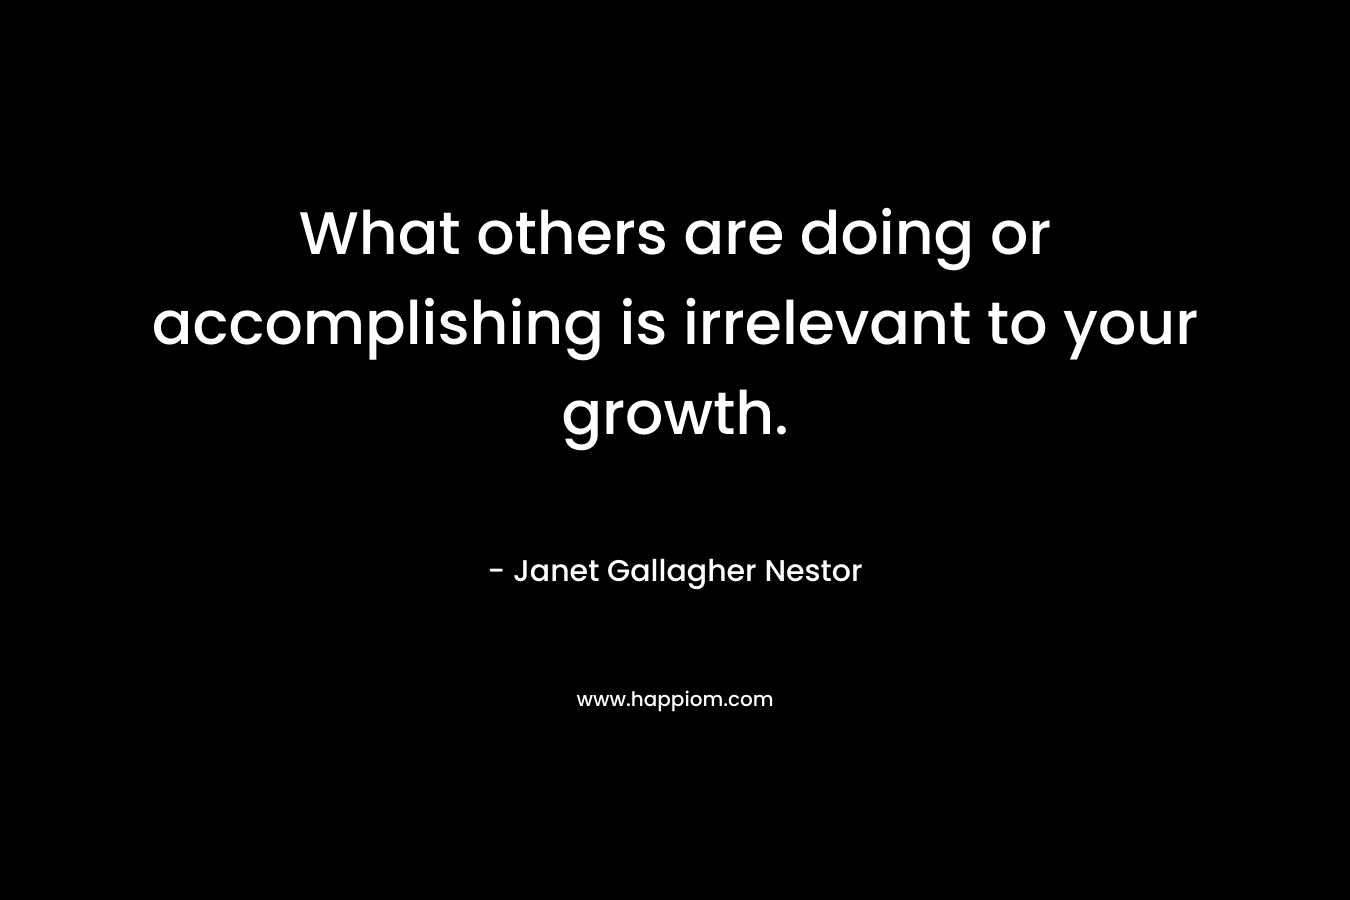 What others are doing or accomplishing is irrelevant to your growth. – Janet Gallagher Nestor